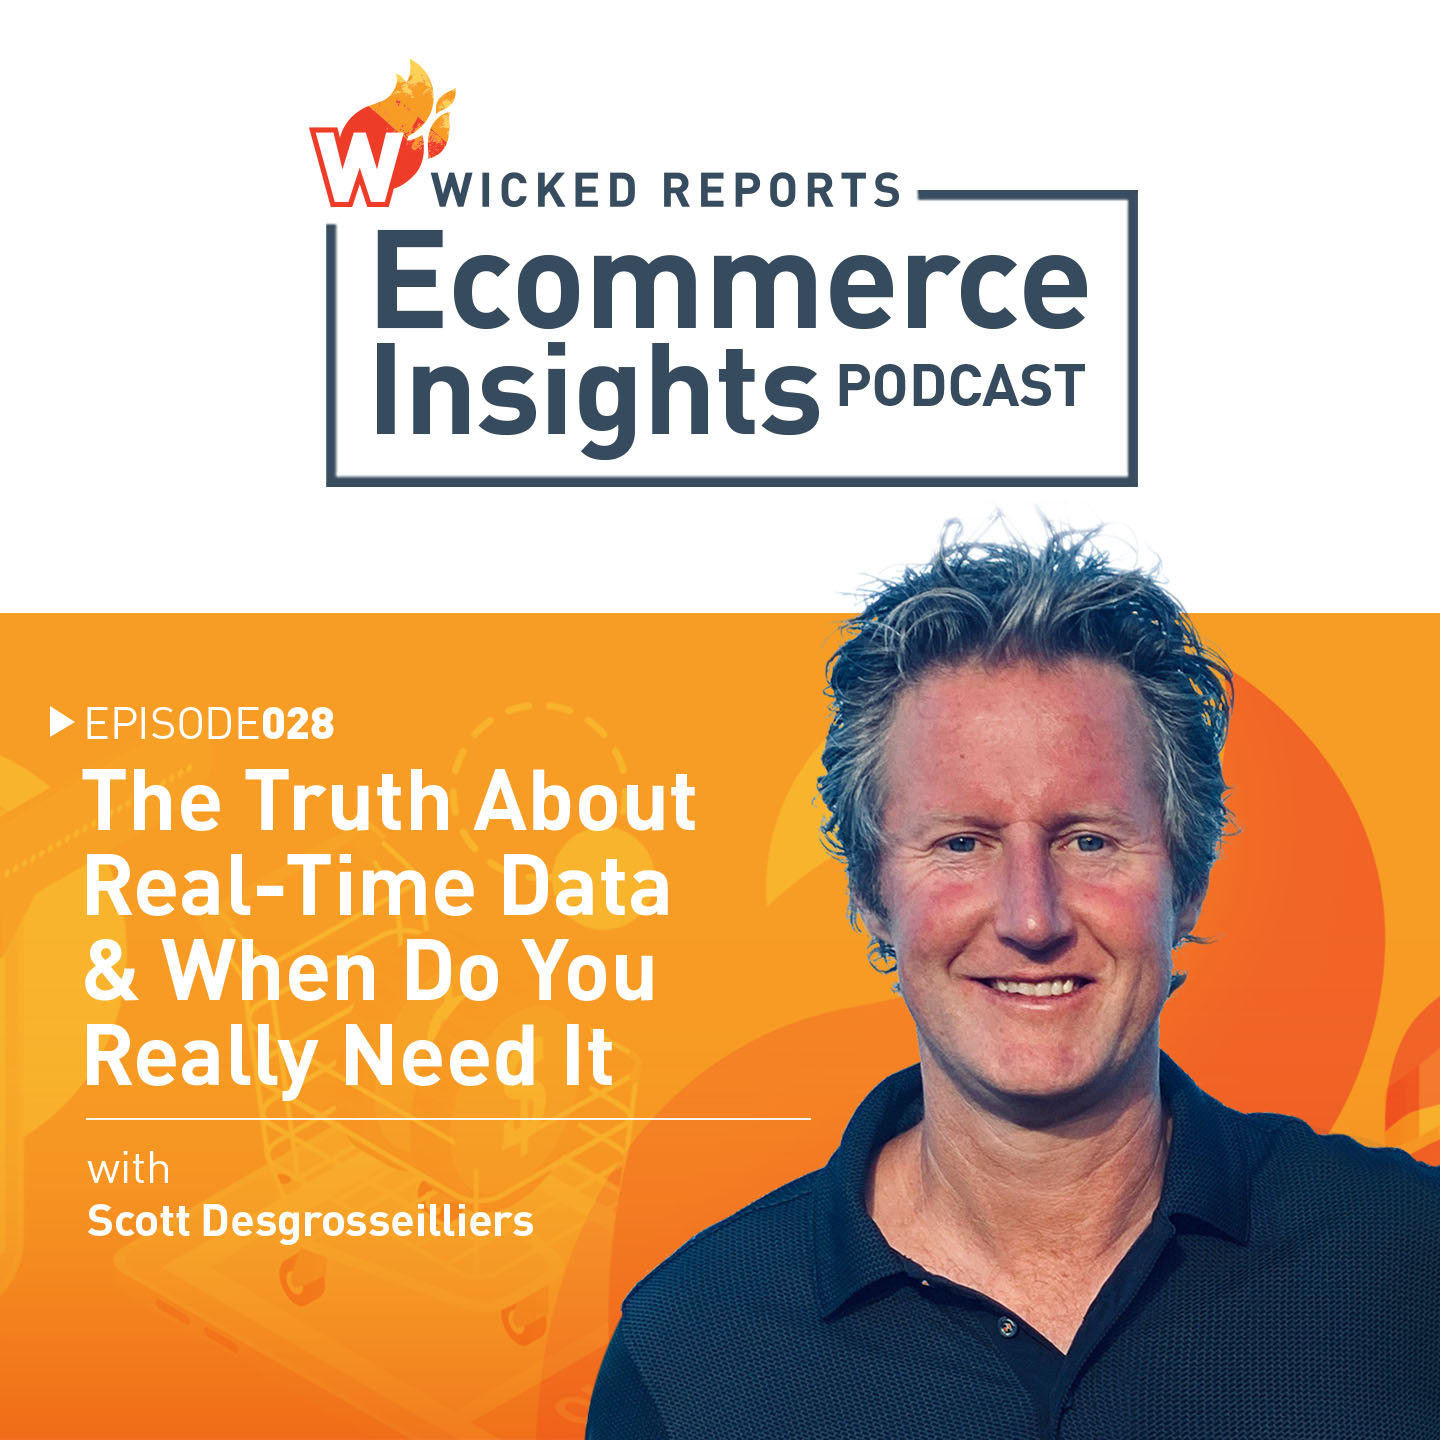 The Truth About Real-Time Data & When Do You Really Need It